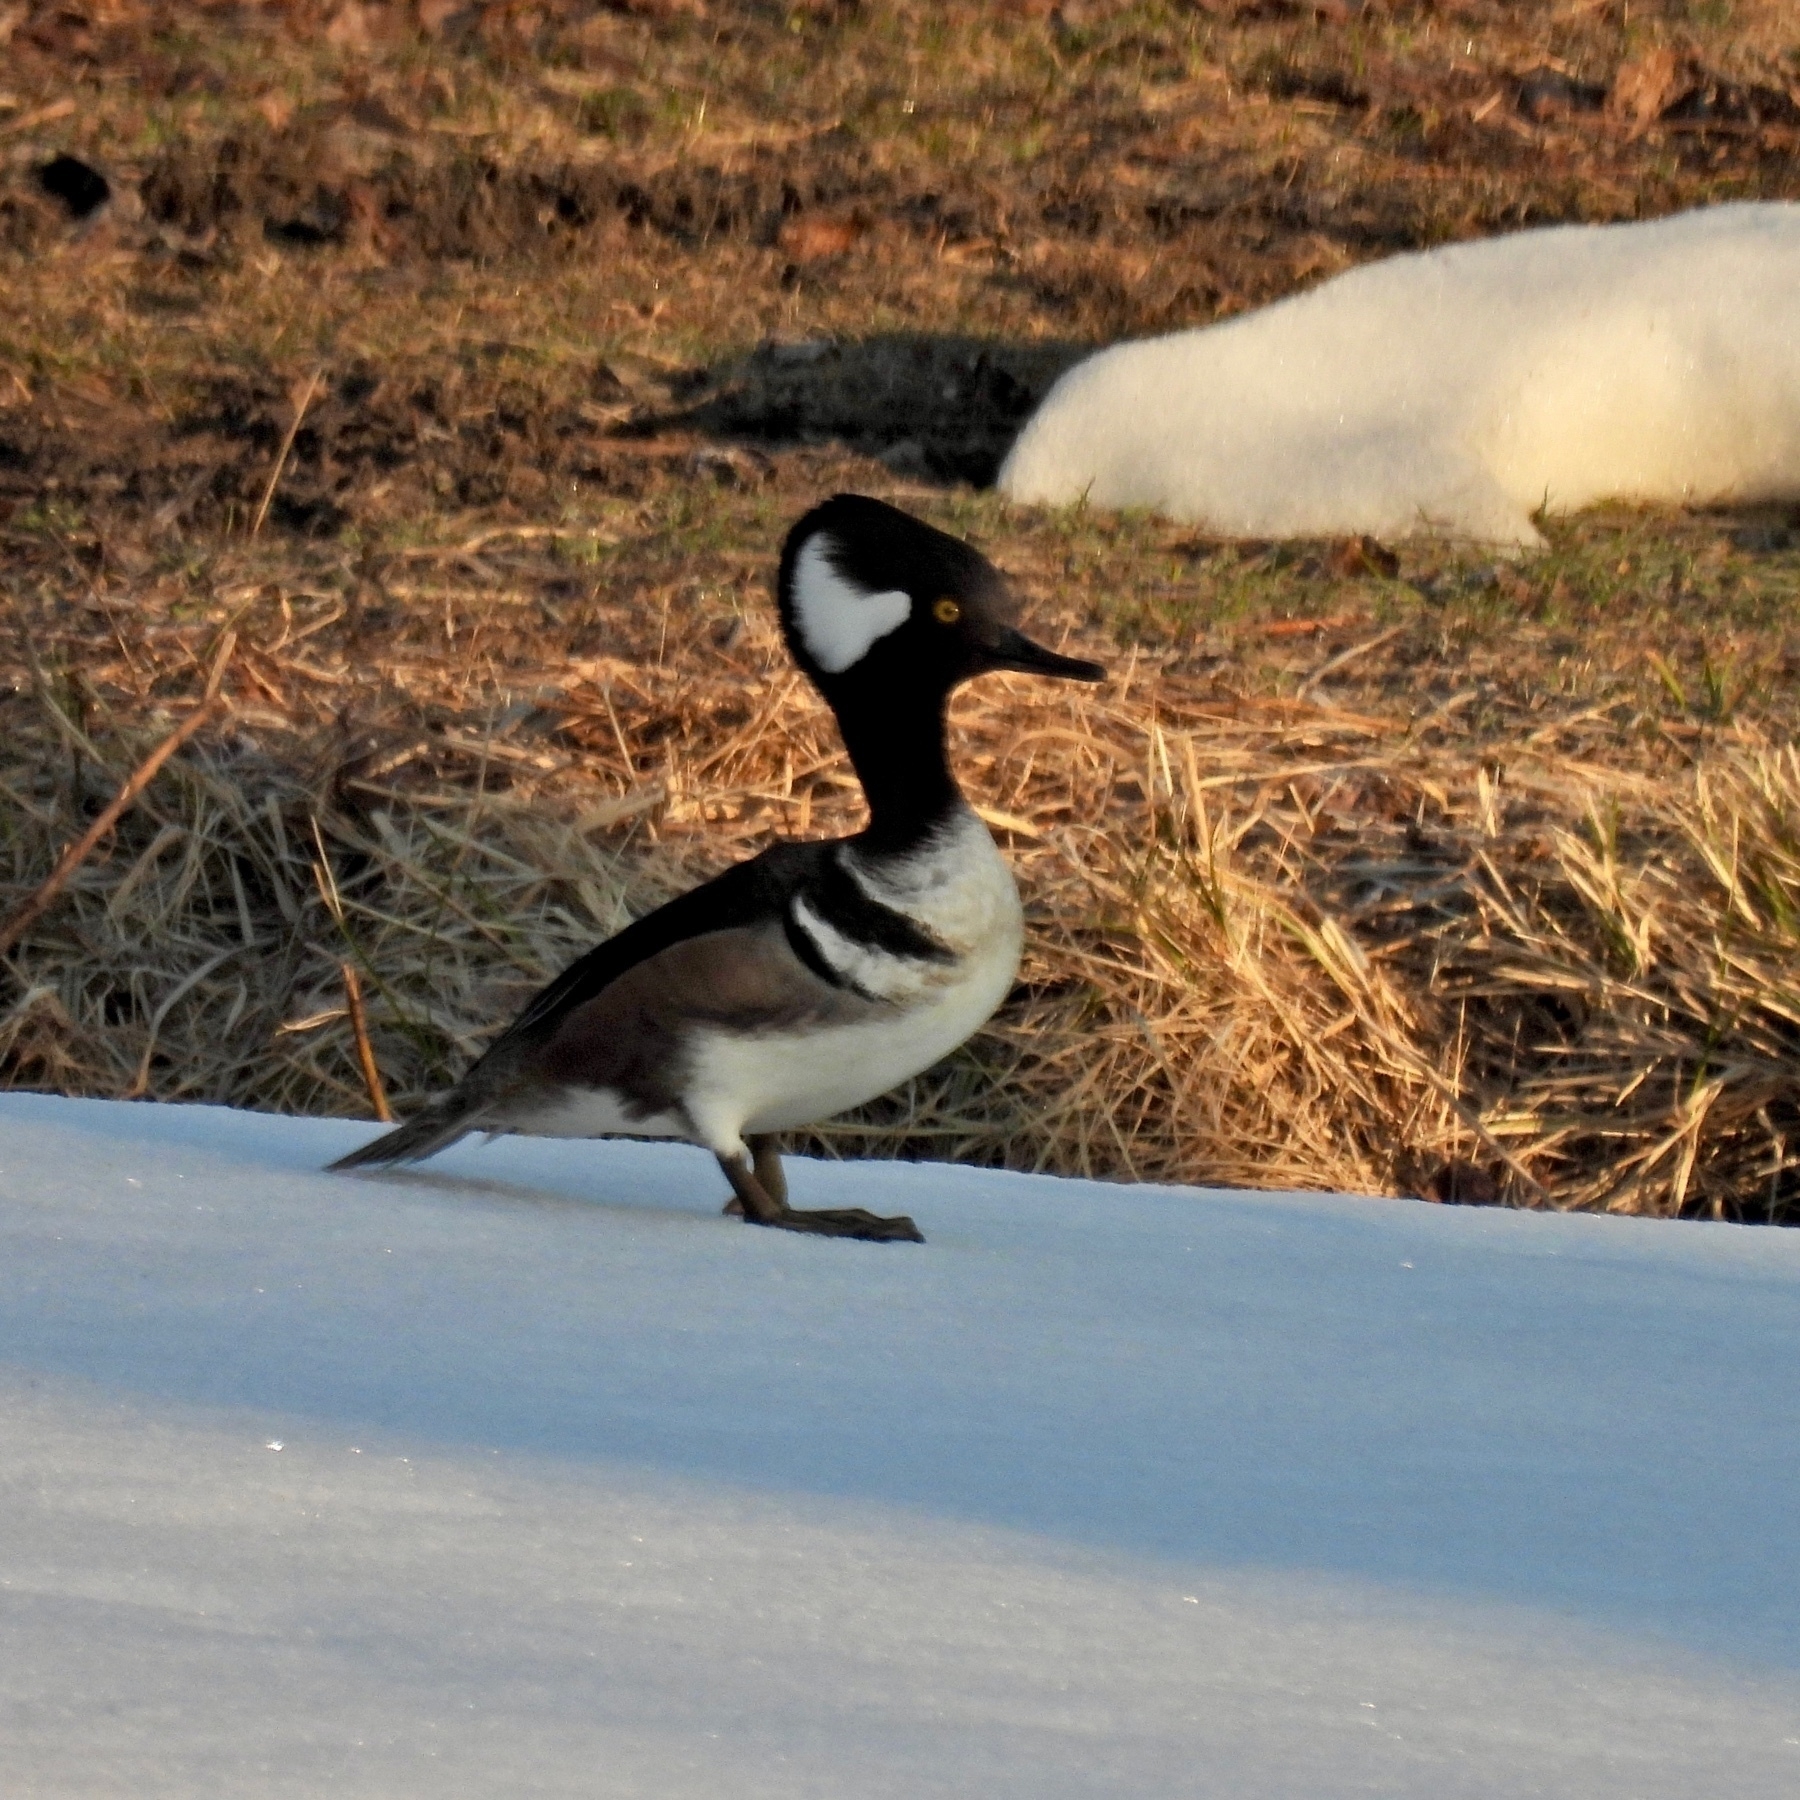 a male common hooded merganser standing on a snow bank on the edge of a pond